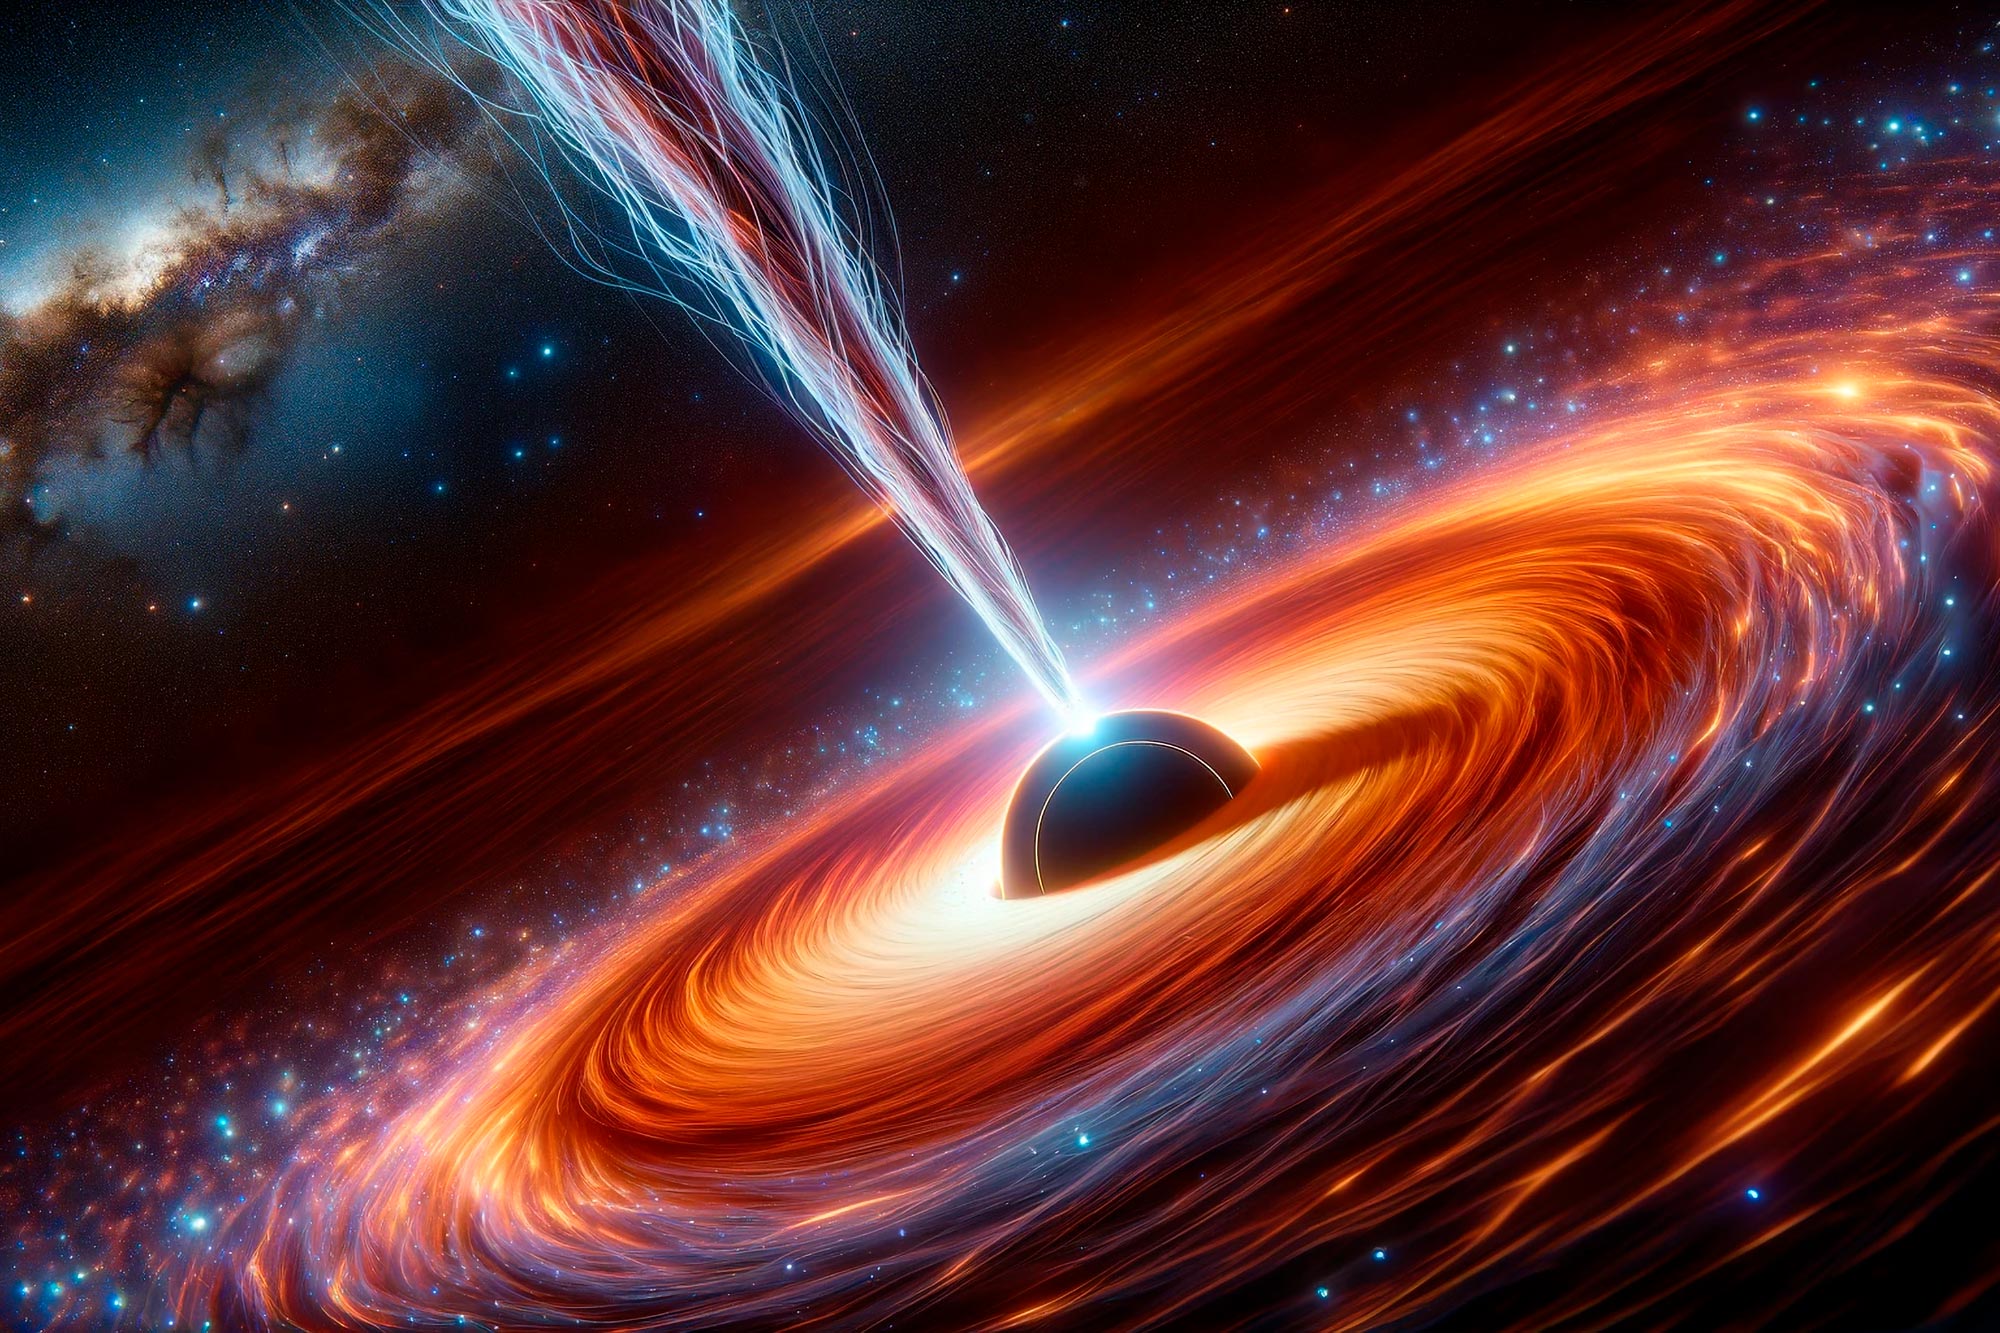 Princeton astrophysicists unravel the mystery of black hole jets and galactic 'light sabers'